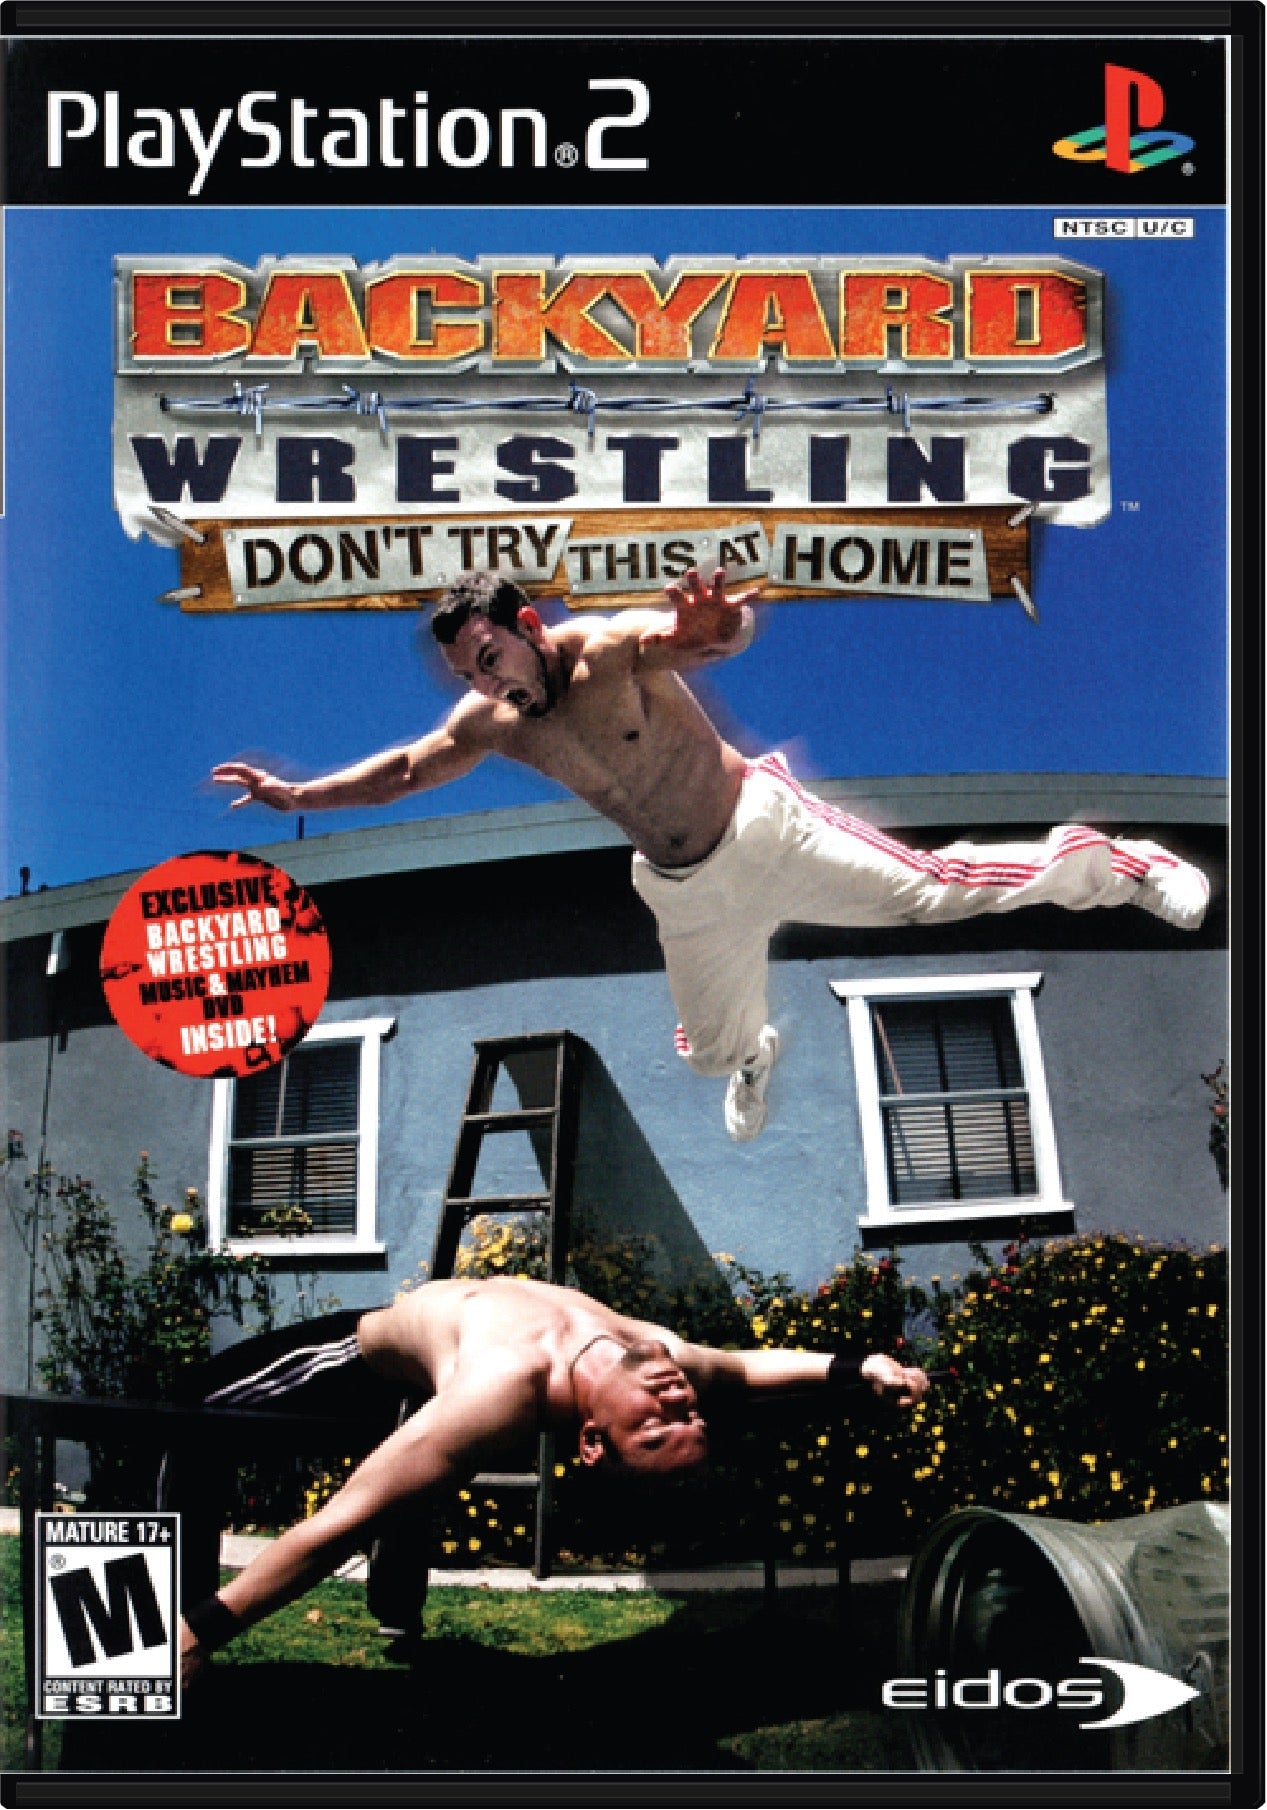 Backyard Wrestling Cover Art and Product Photo